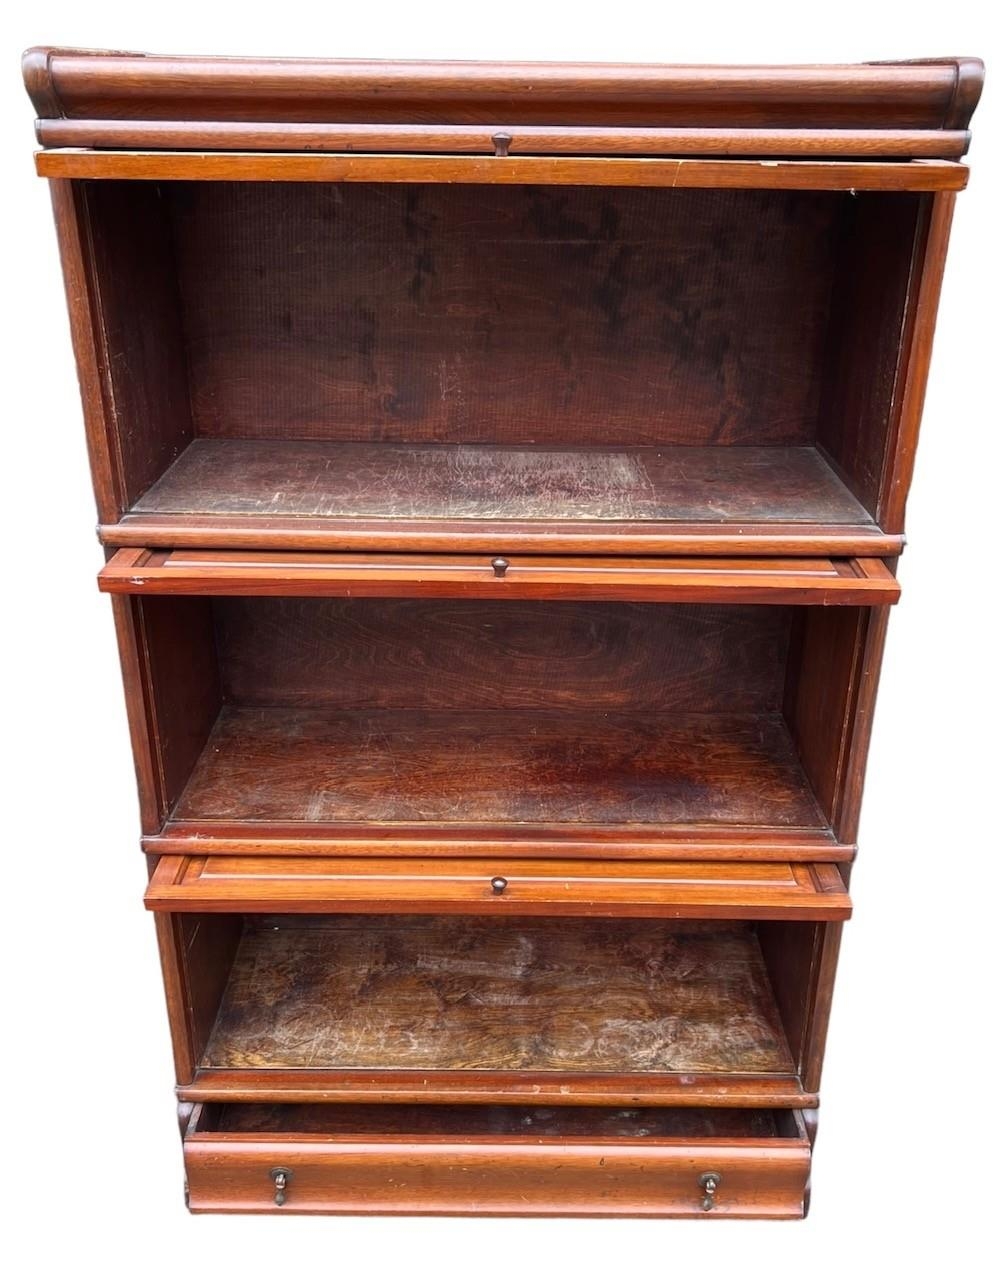 AN EARLY 20TH CENTURY MAHOGANY GLOBE WERNICKE DESIGN THREE SECTION BOOKCASE With paneled doors above - Image 5 of 5